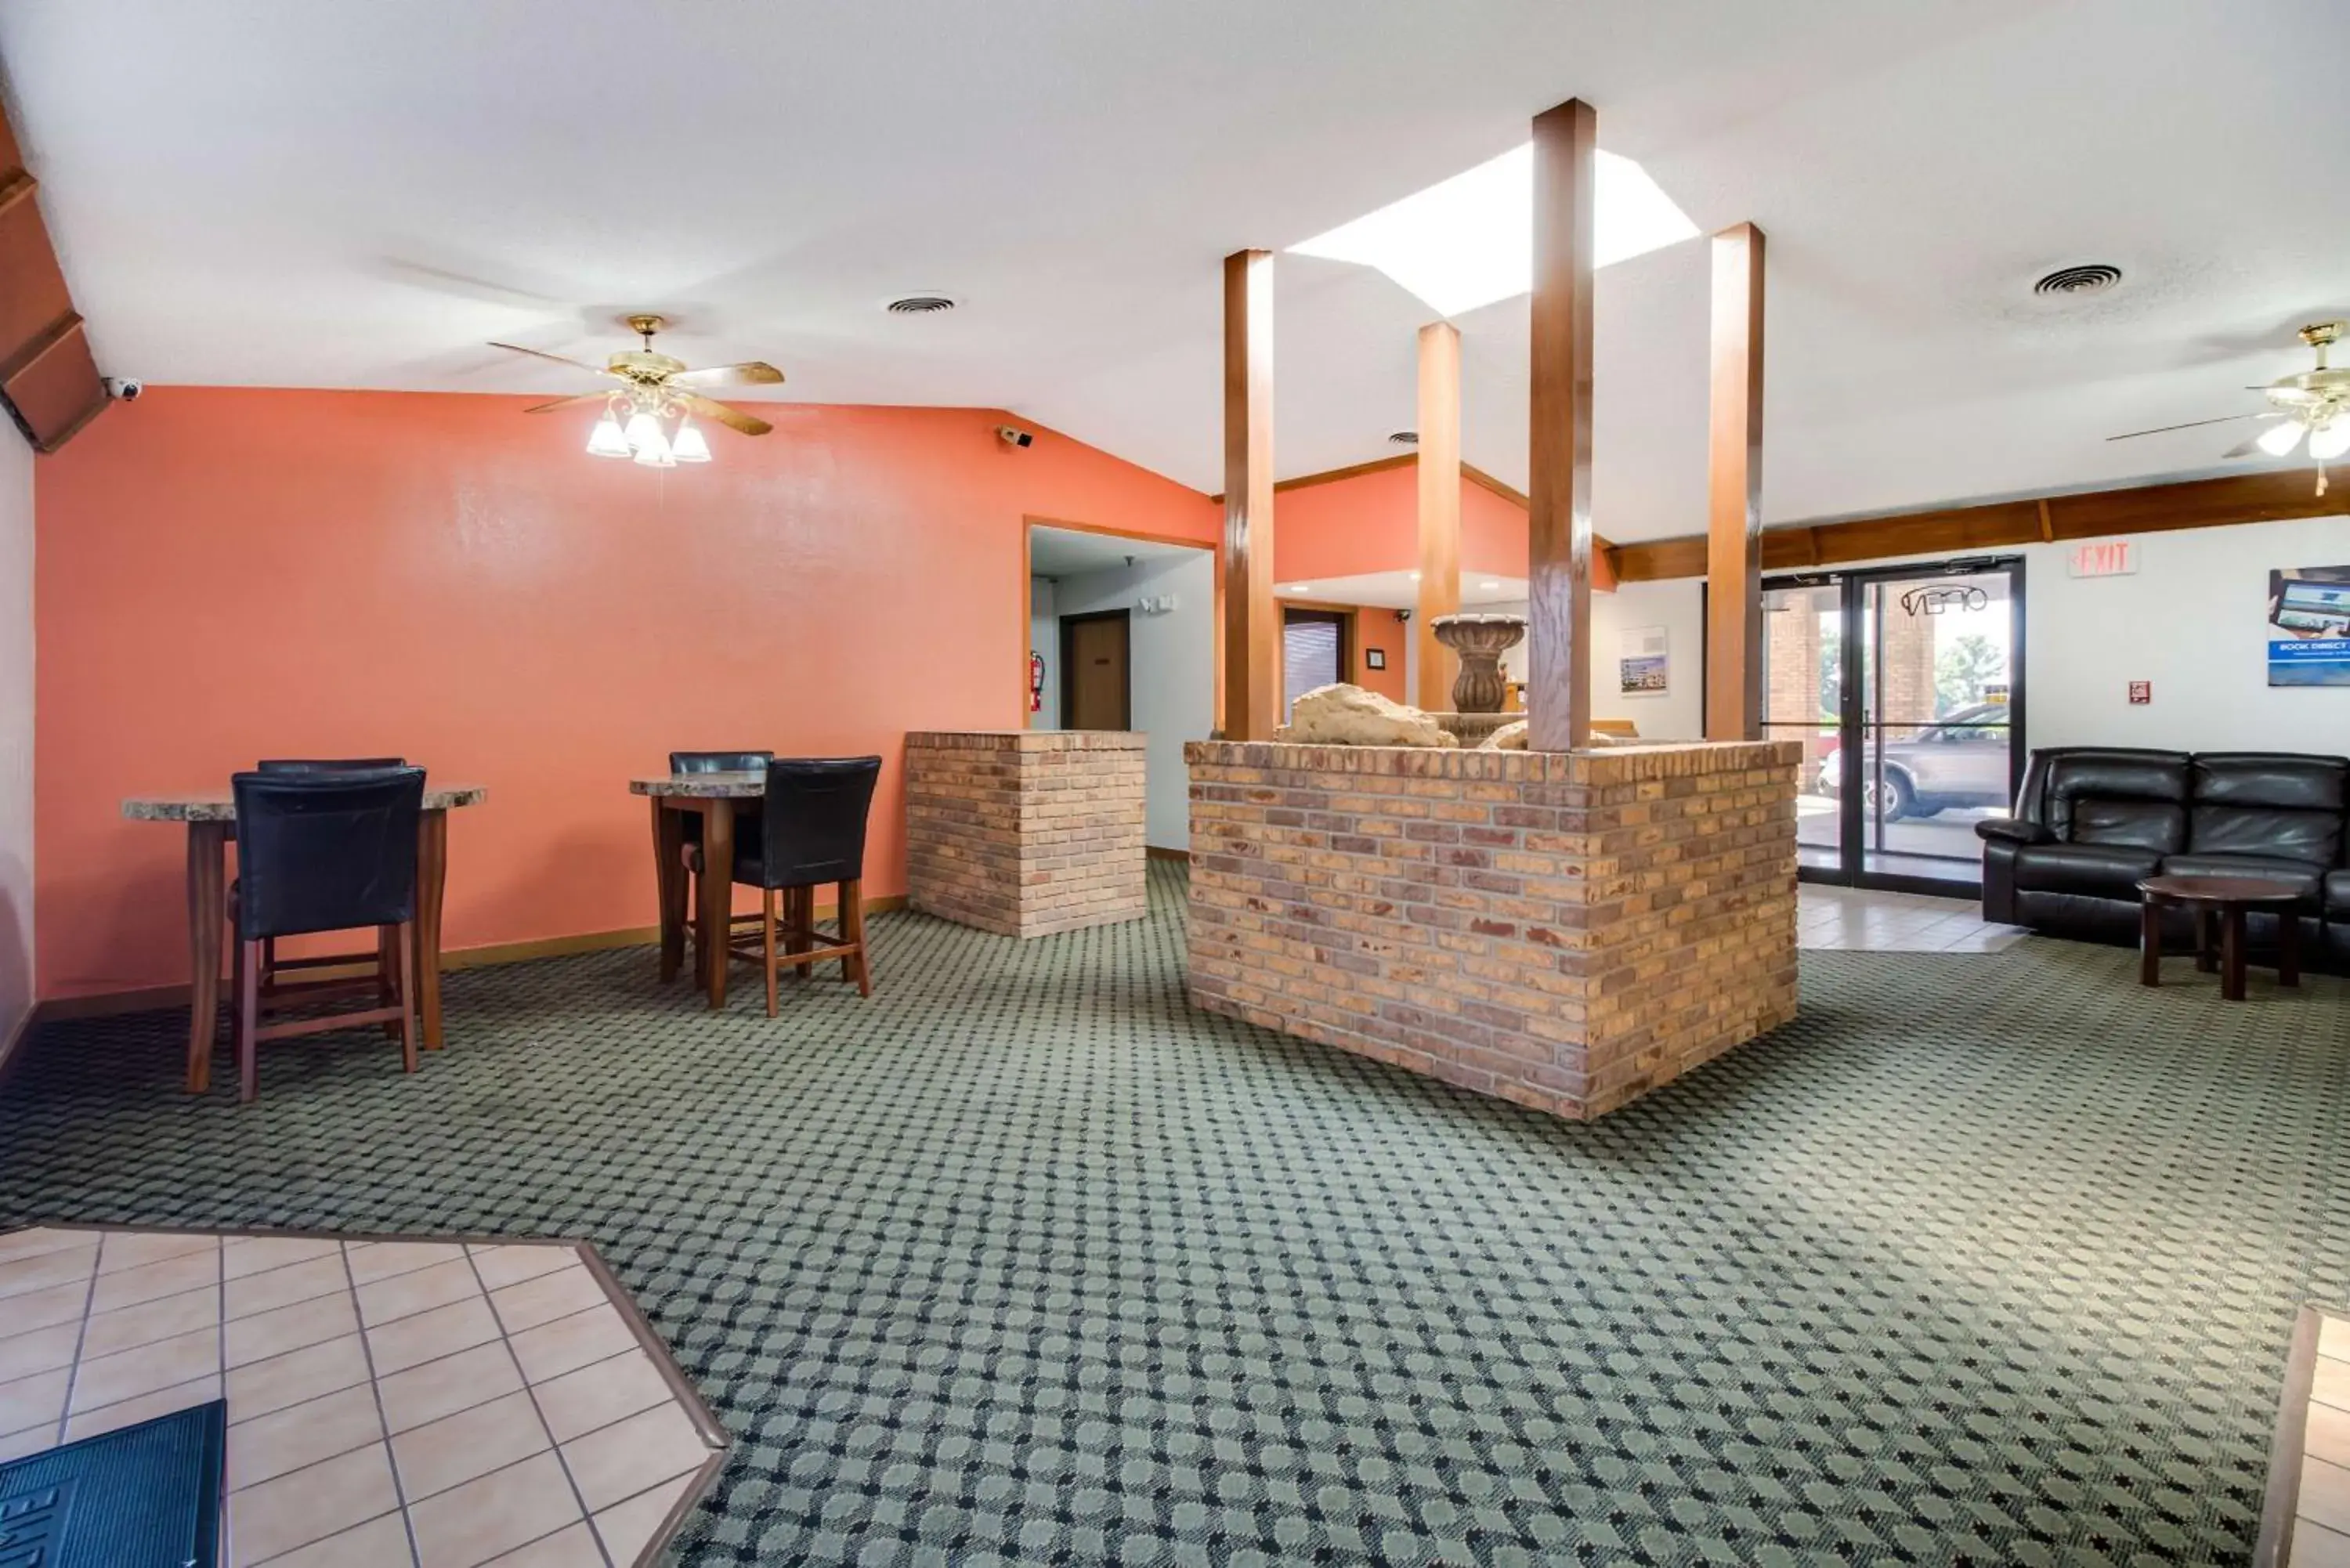 Lobby or reception in Motel 6-Marion, IL